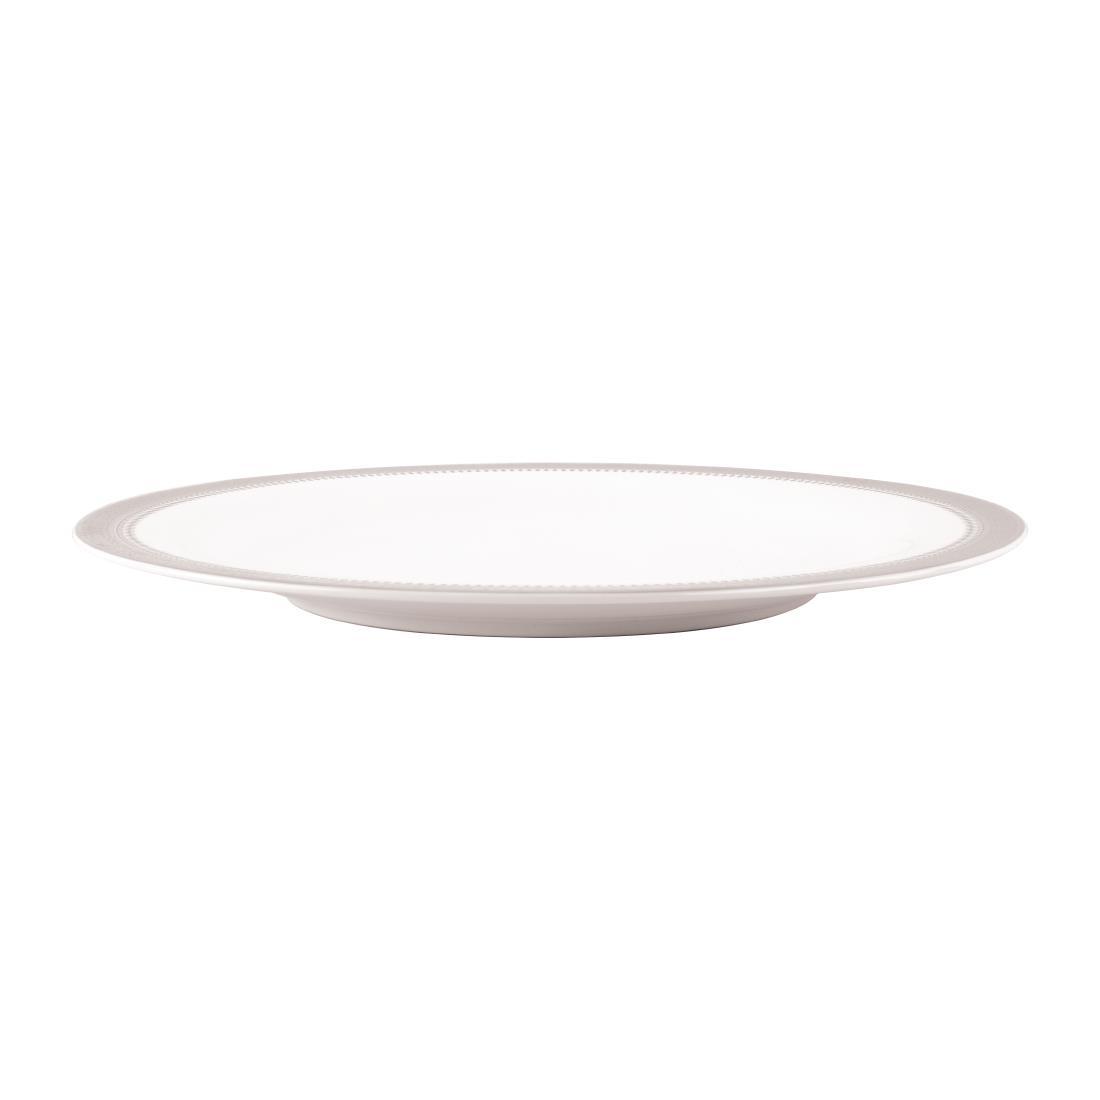 Royal Bone Afternoon Tea Couronne Plate 255mm (Pack of 6) - FB738  - 3